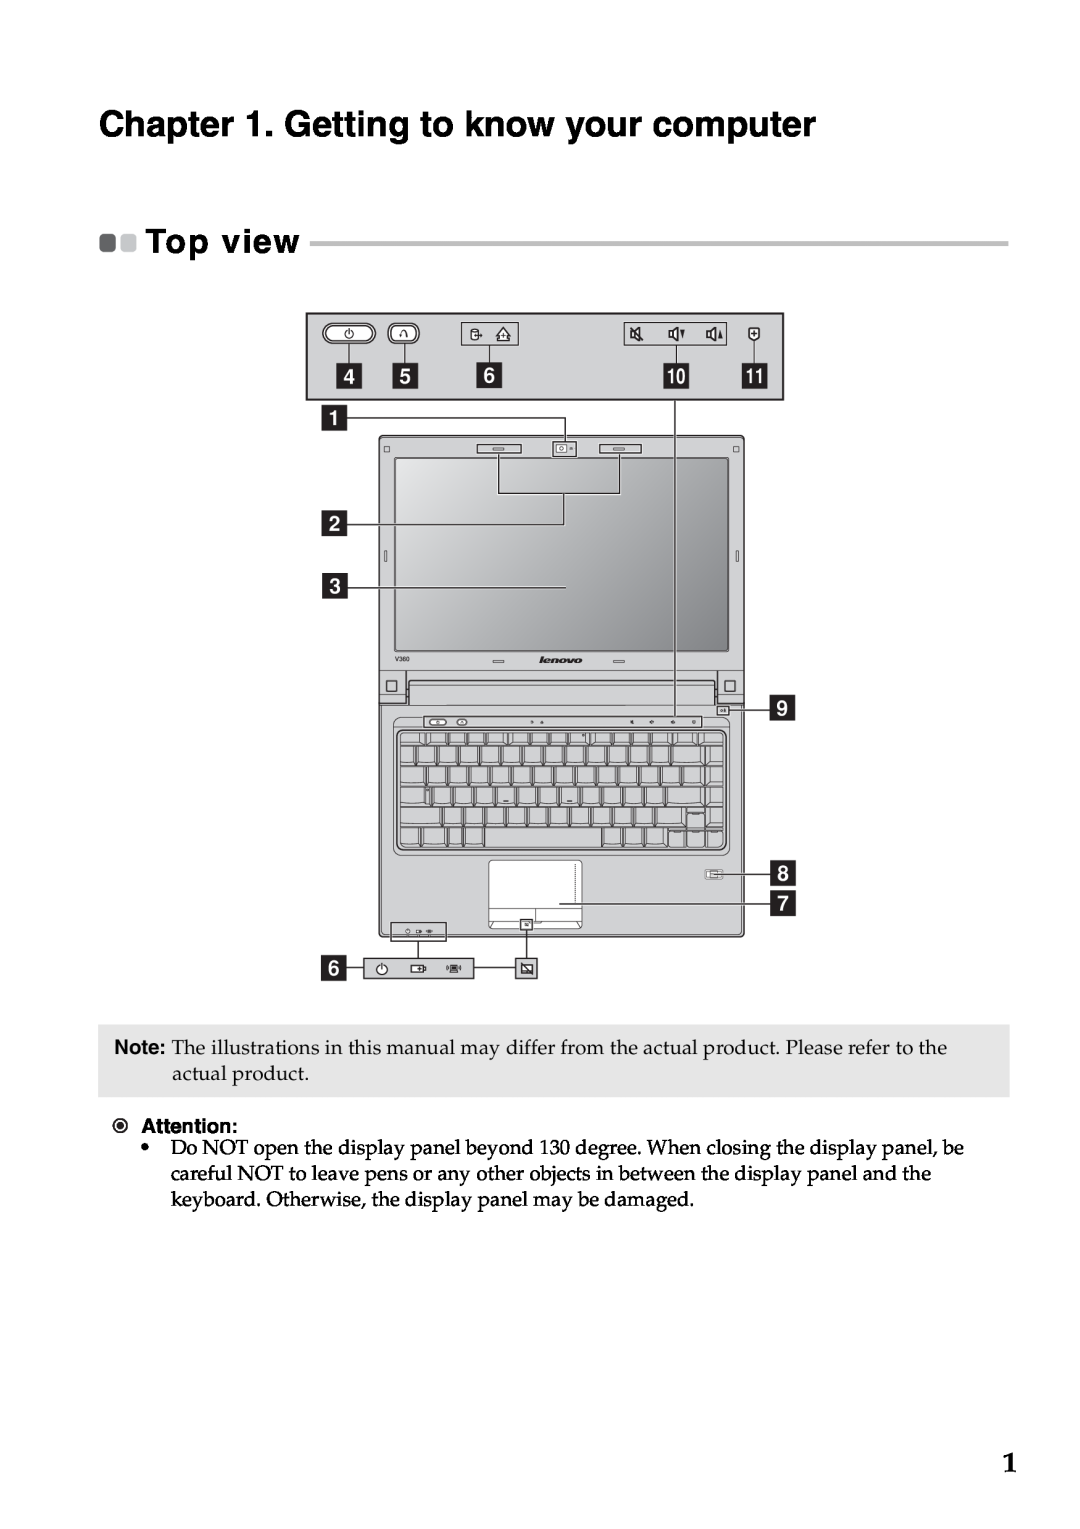 Lenovo V360 manual Getting to know your computer, Top view, h g f 